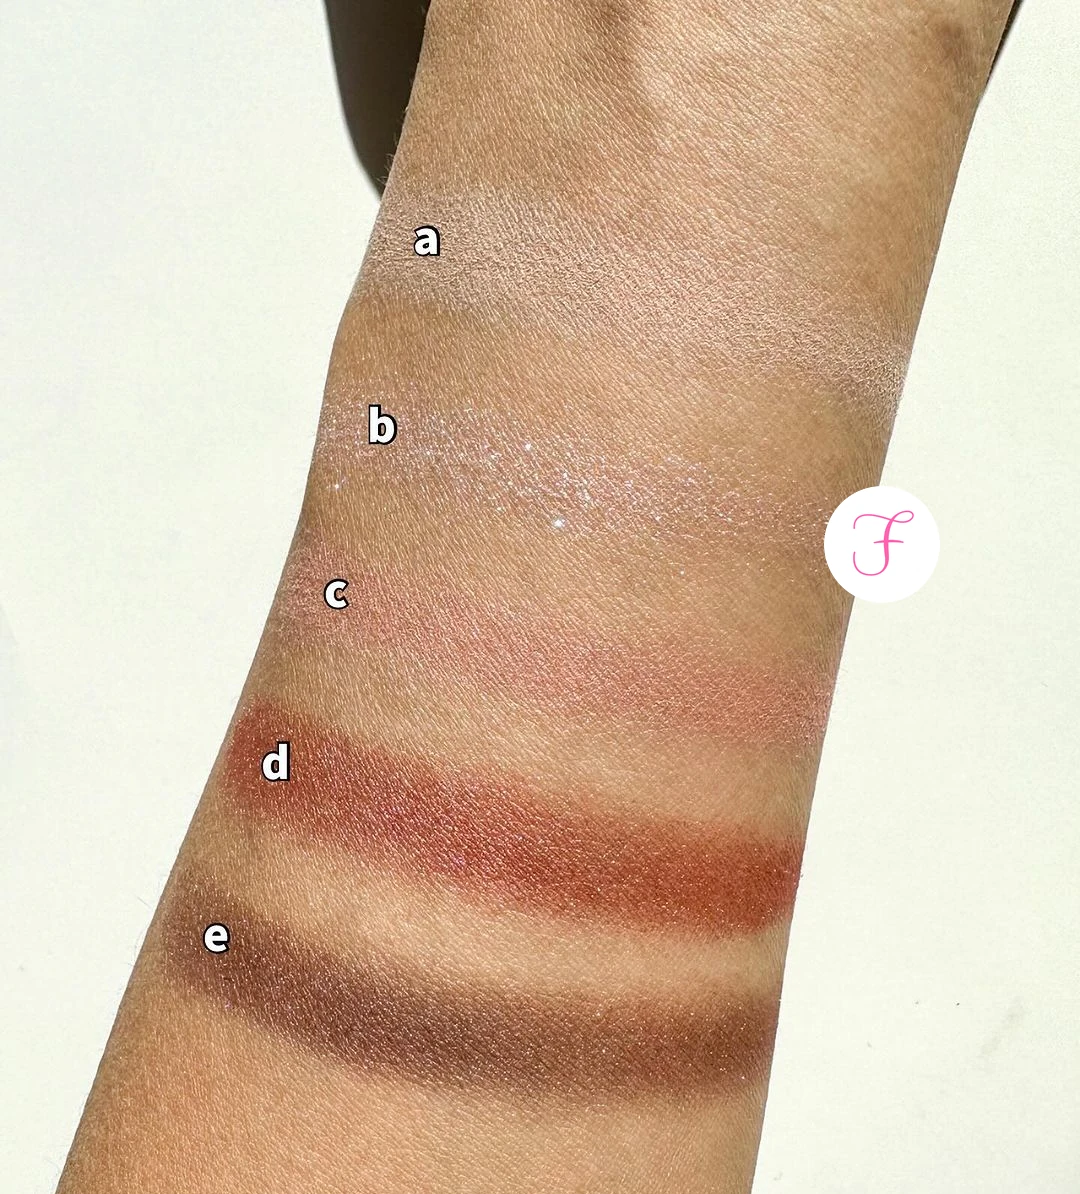 chanel-les-beiges-winter-glow-palette-swatches